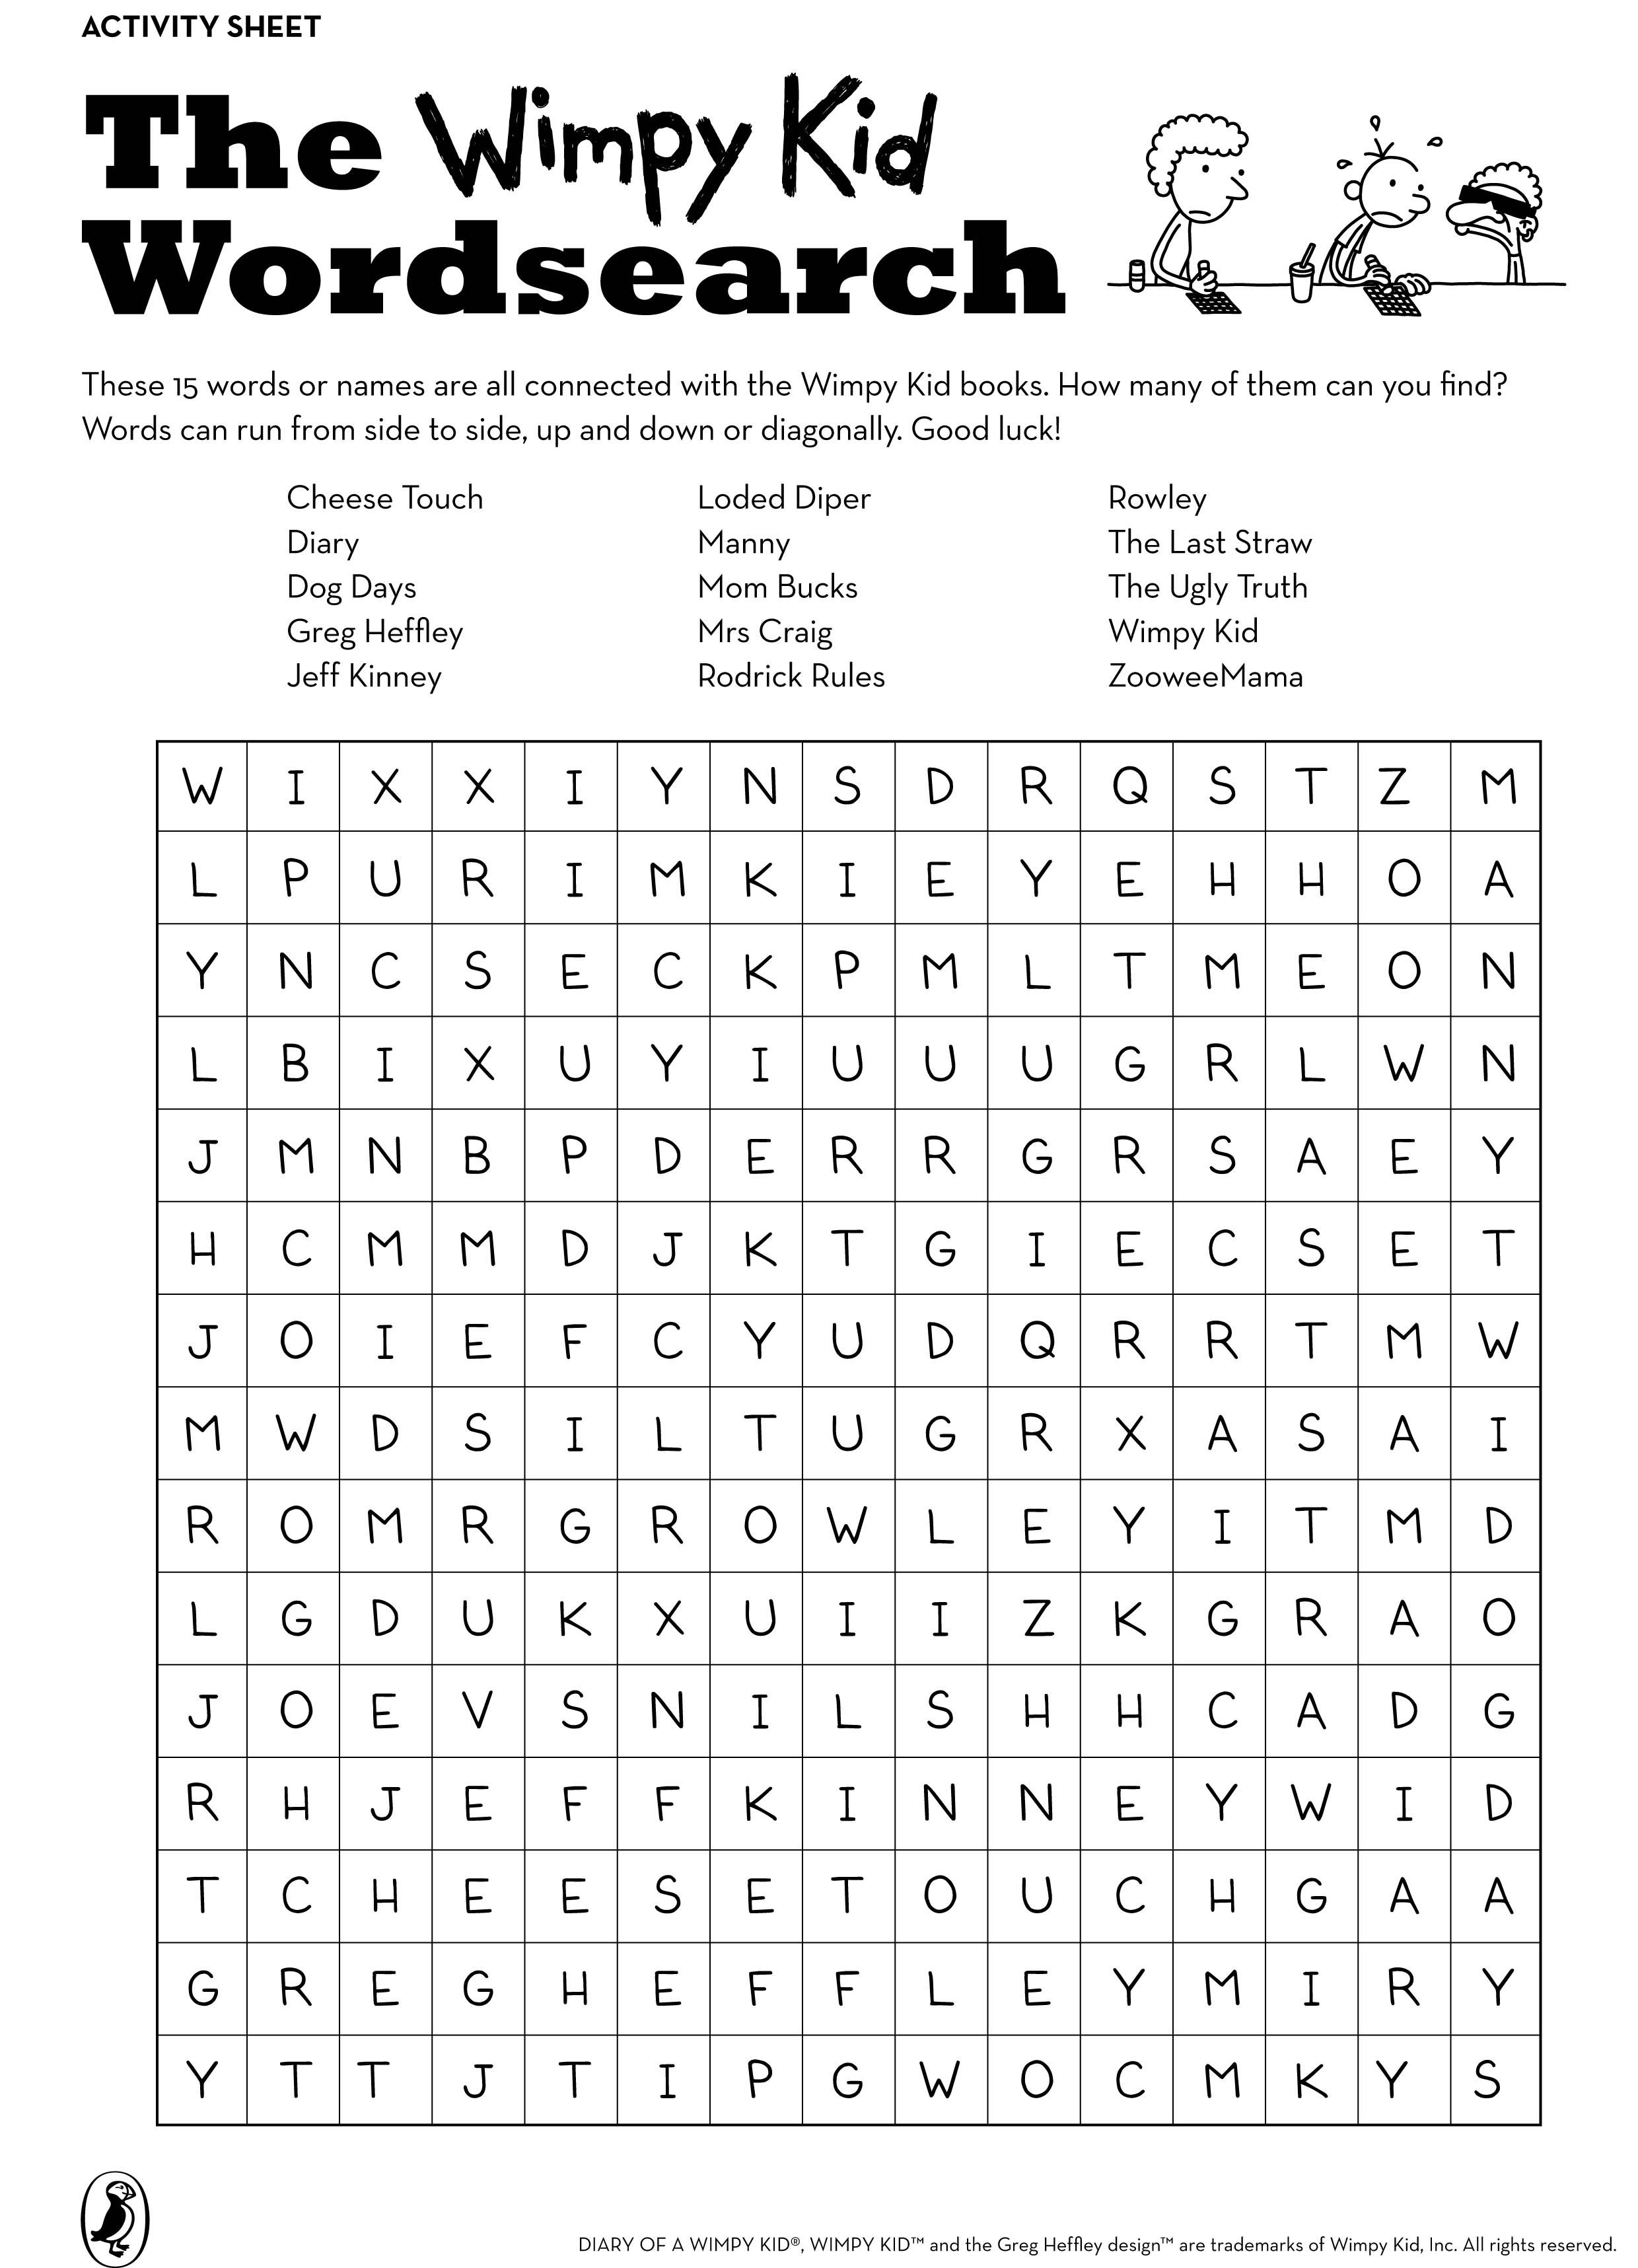 Wimpy Kid Wordsearch | Diary Of A Wimpy Kid | Pinterest | Wimpy Kid - Free Printable Word Searches For Kids